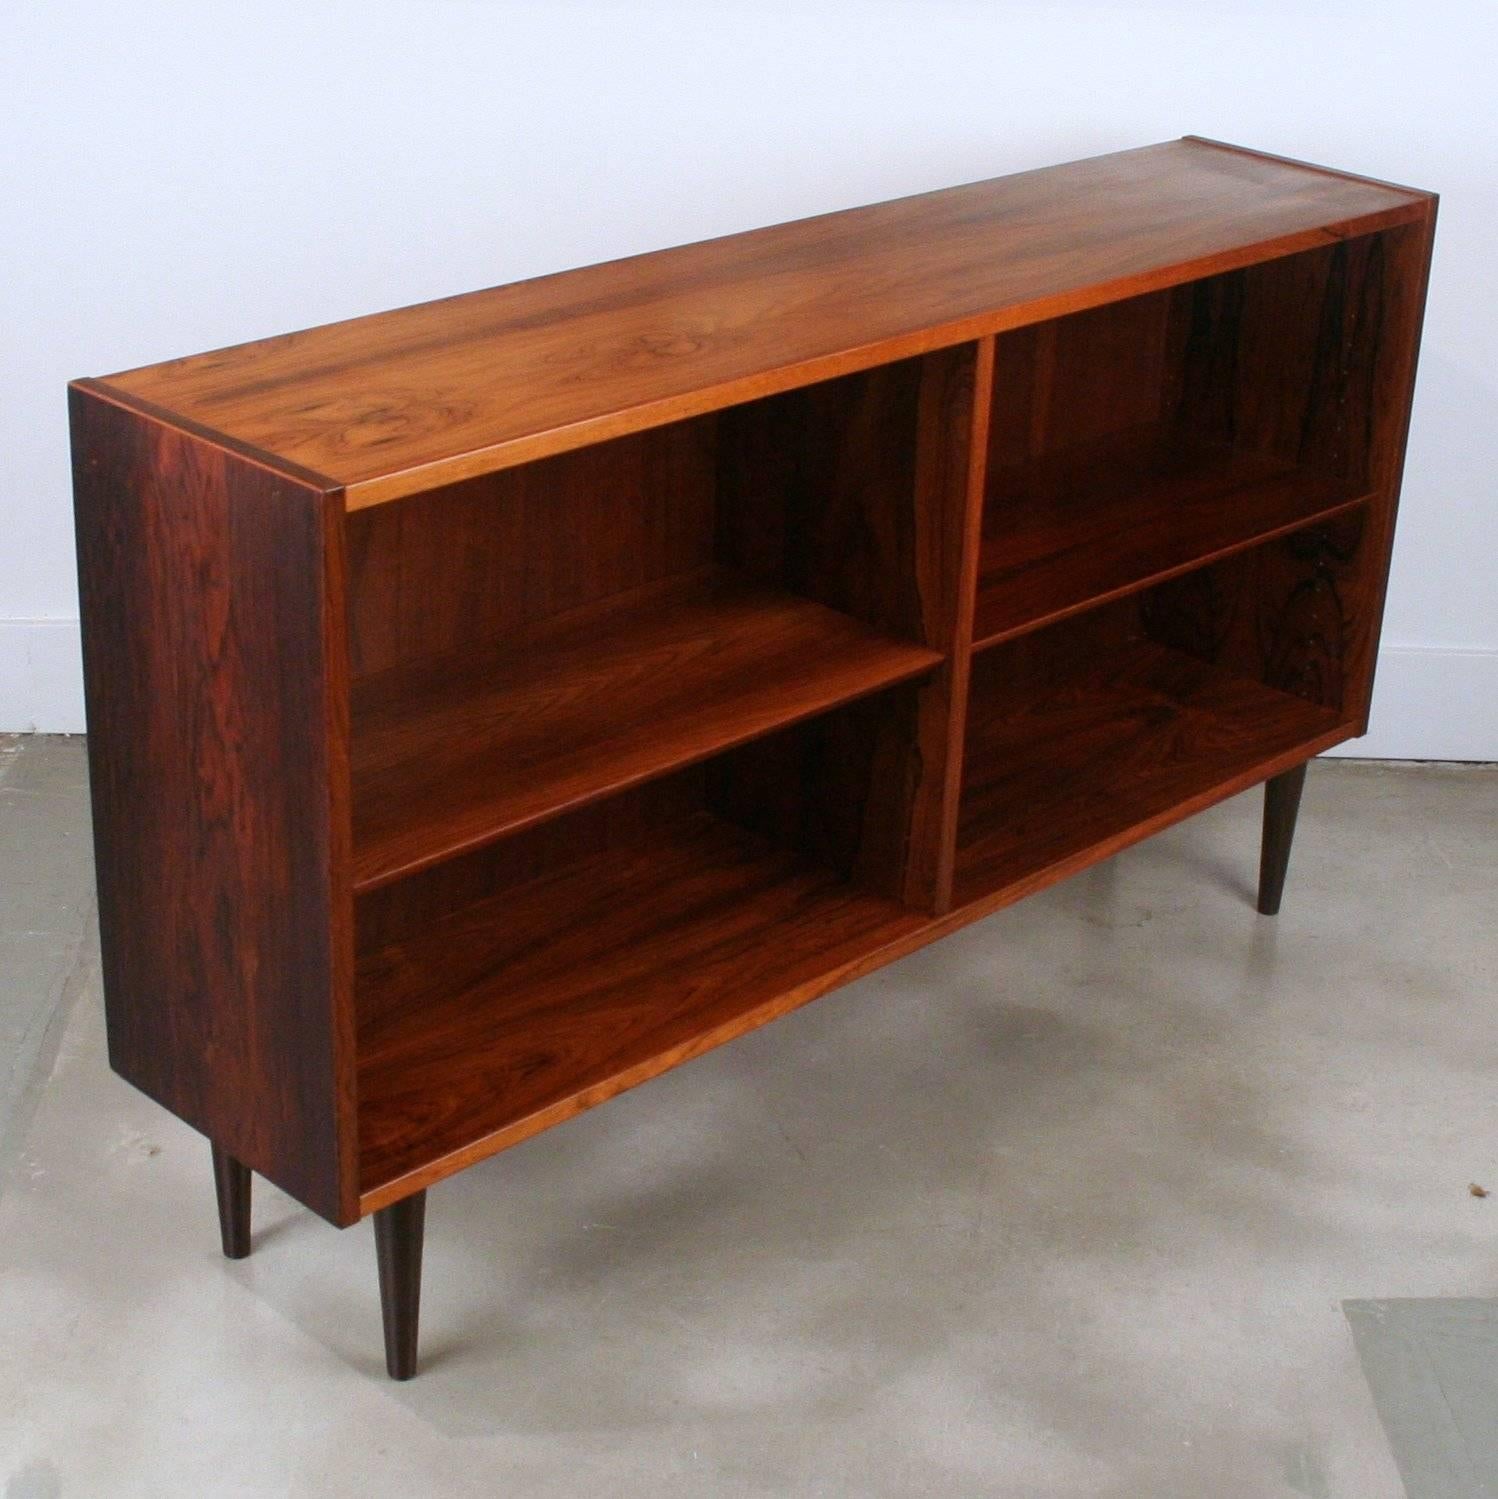 Lovely low-profile bookcase crafted in rosewood sitting on conical wood legs, width adjustable shelving.